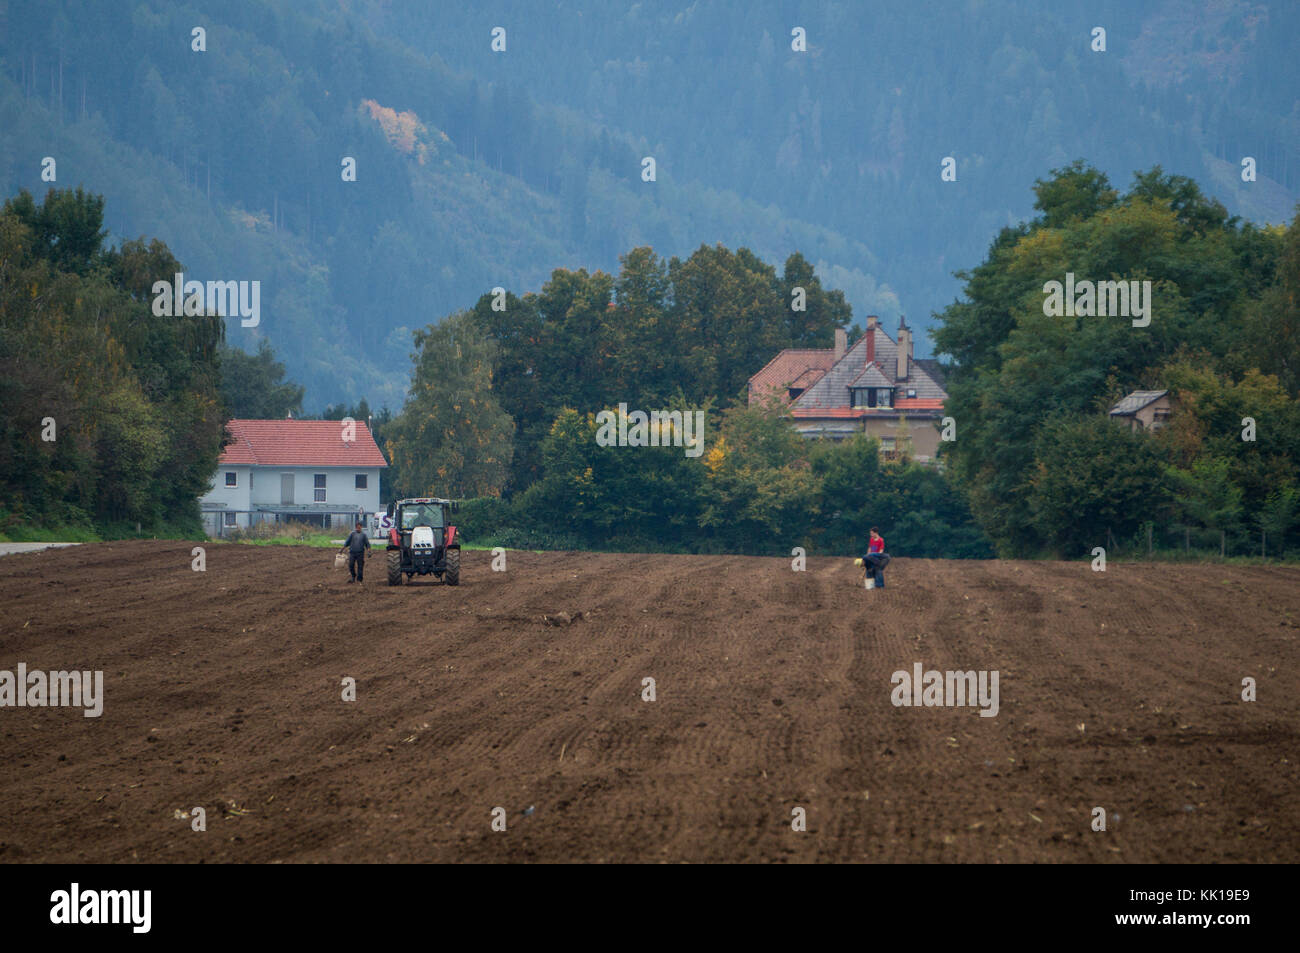 Fohnsdorf, Austria - 30.09.2017: People working a field in southern Austria Stock Photo